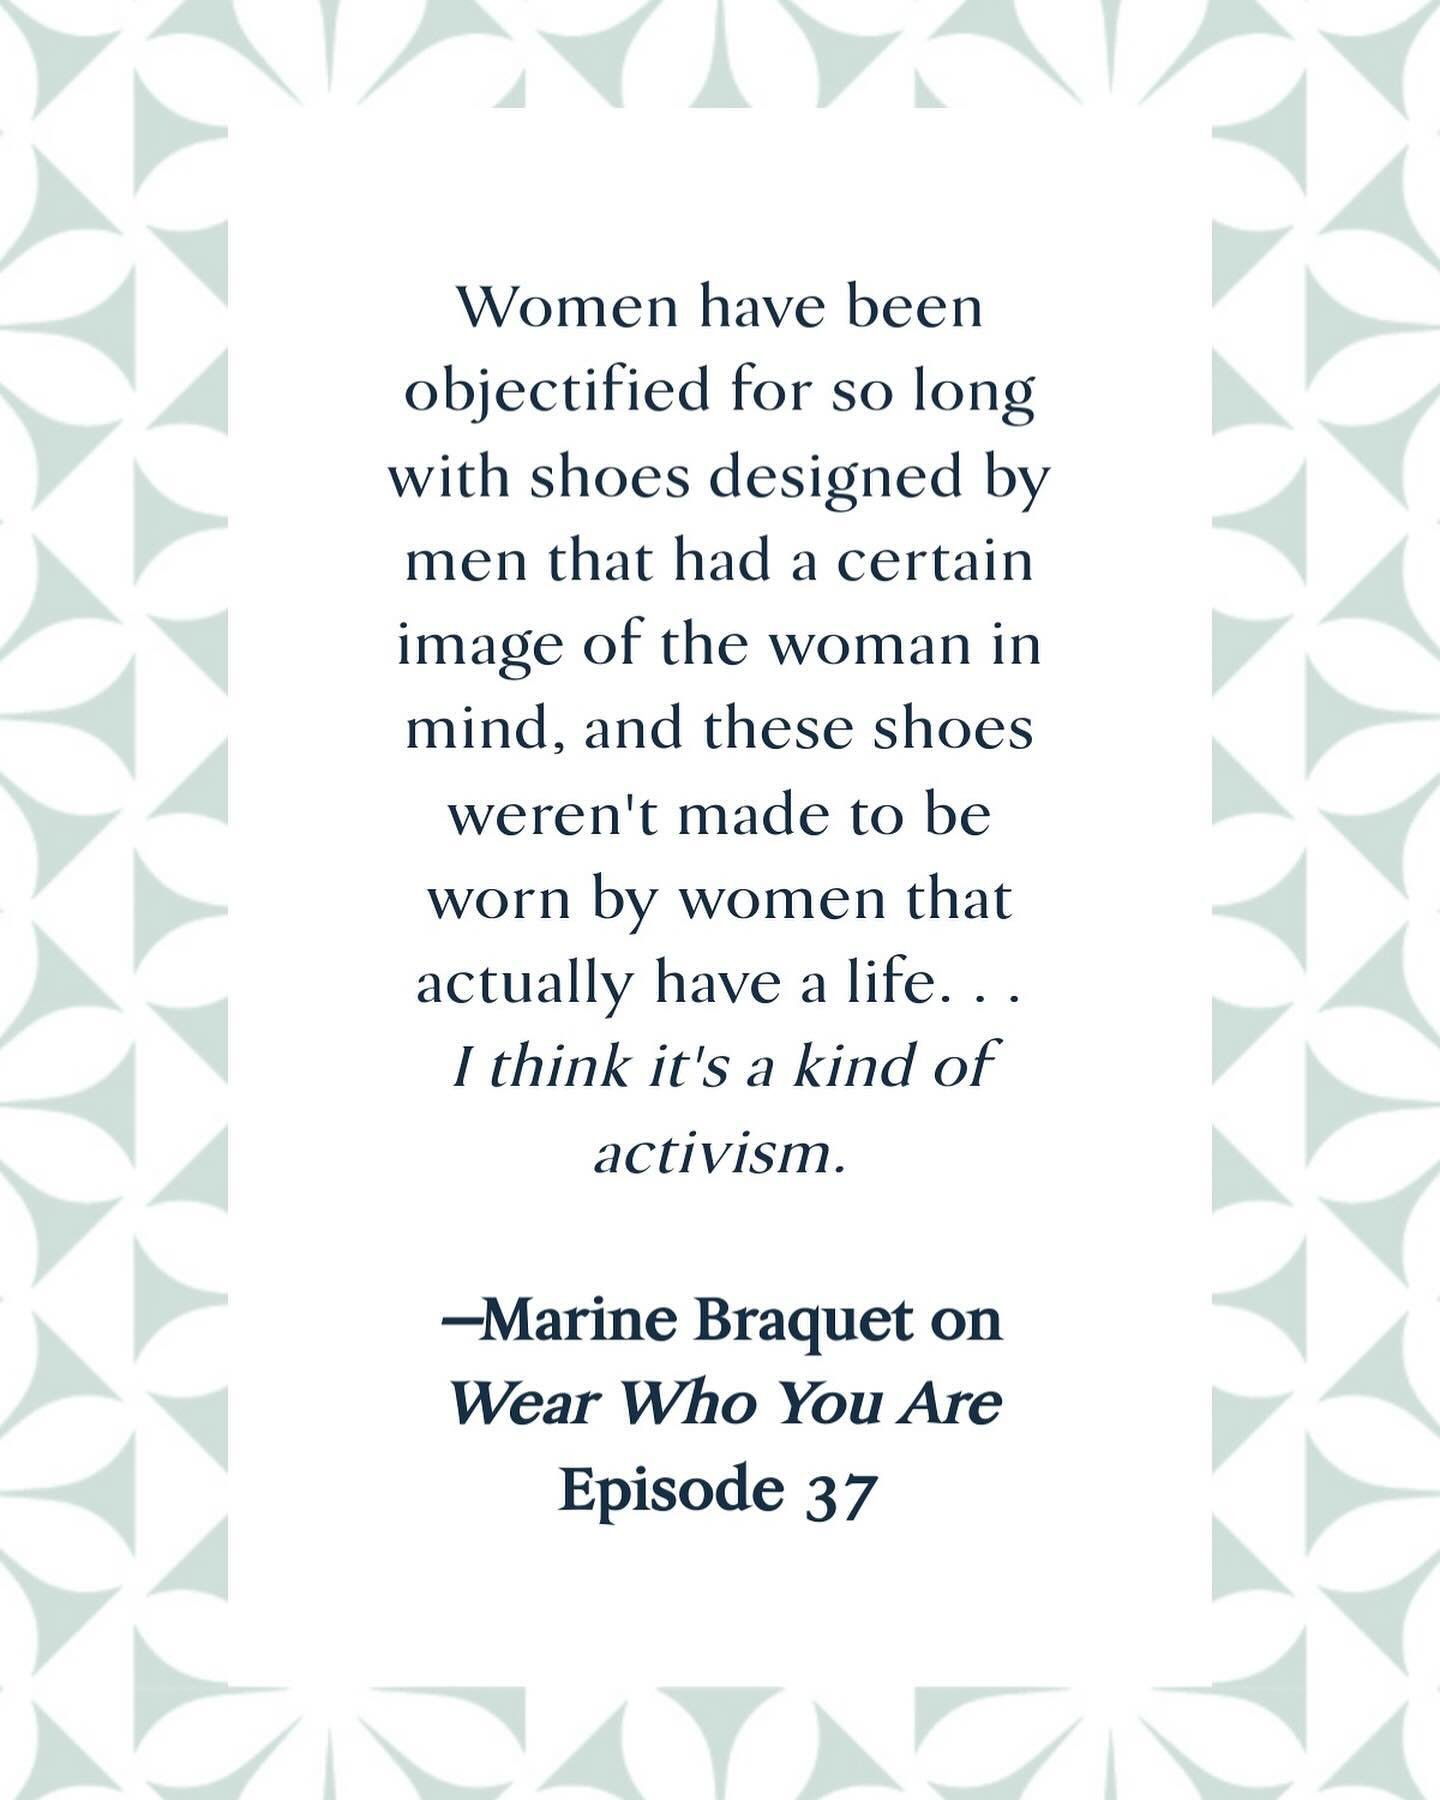 Shoes for modern working women by modern working women&mdash;I&rsquo;ll co-sign that! Marine &amp; Paule, co-founders of @nomasei_official, are the real deal. It was a pleasure to be in conversation with @marine.braquet in my latest Wear Who You Are 